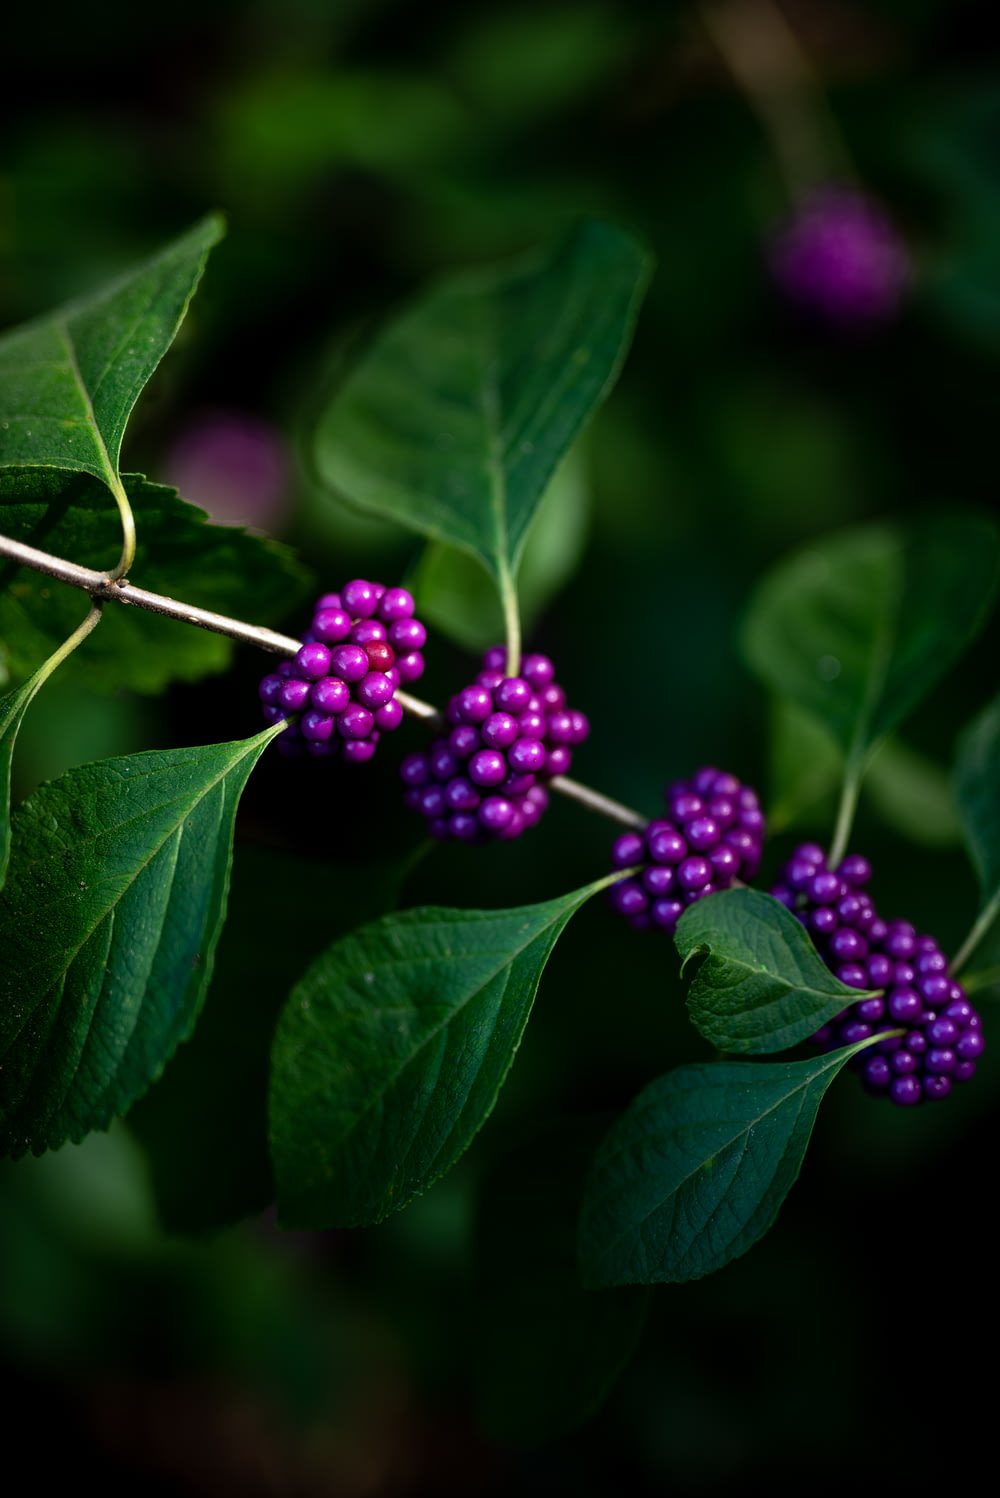 a branch with purple berries and green leaves